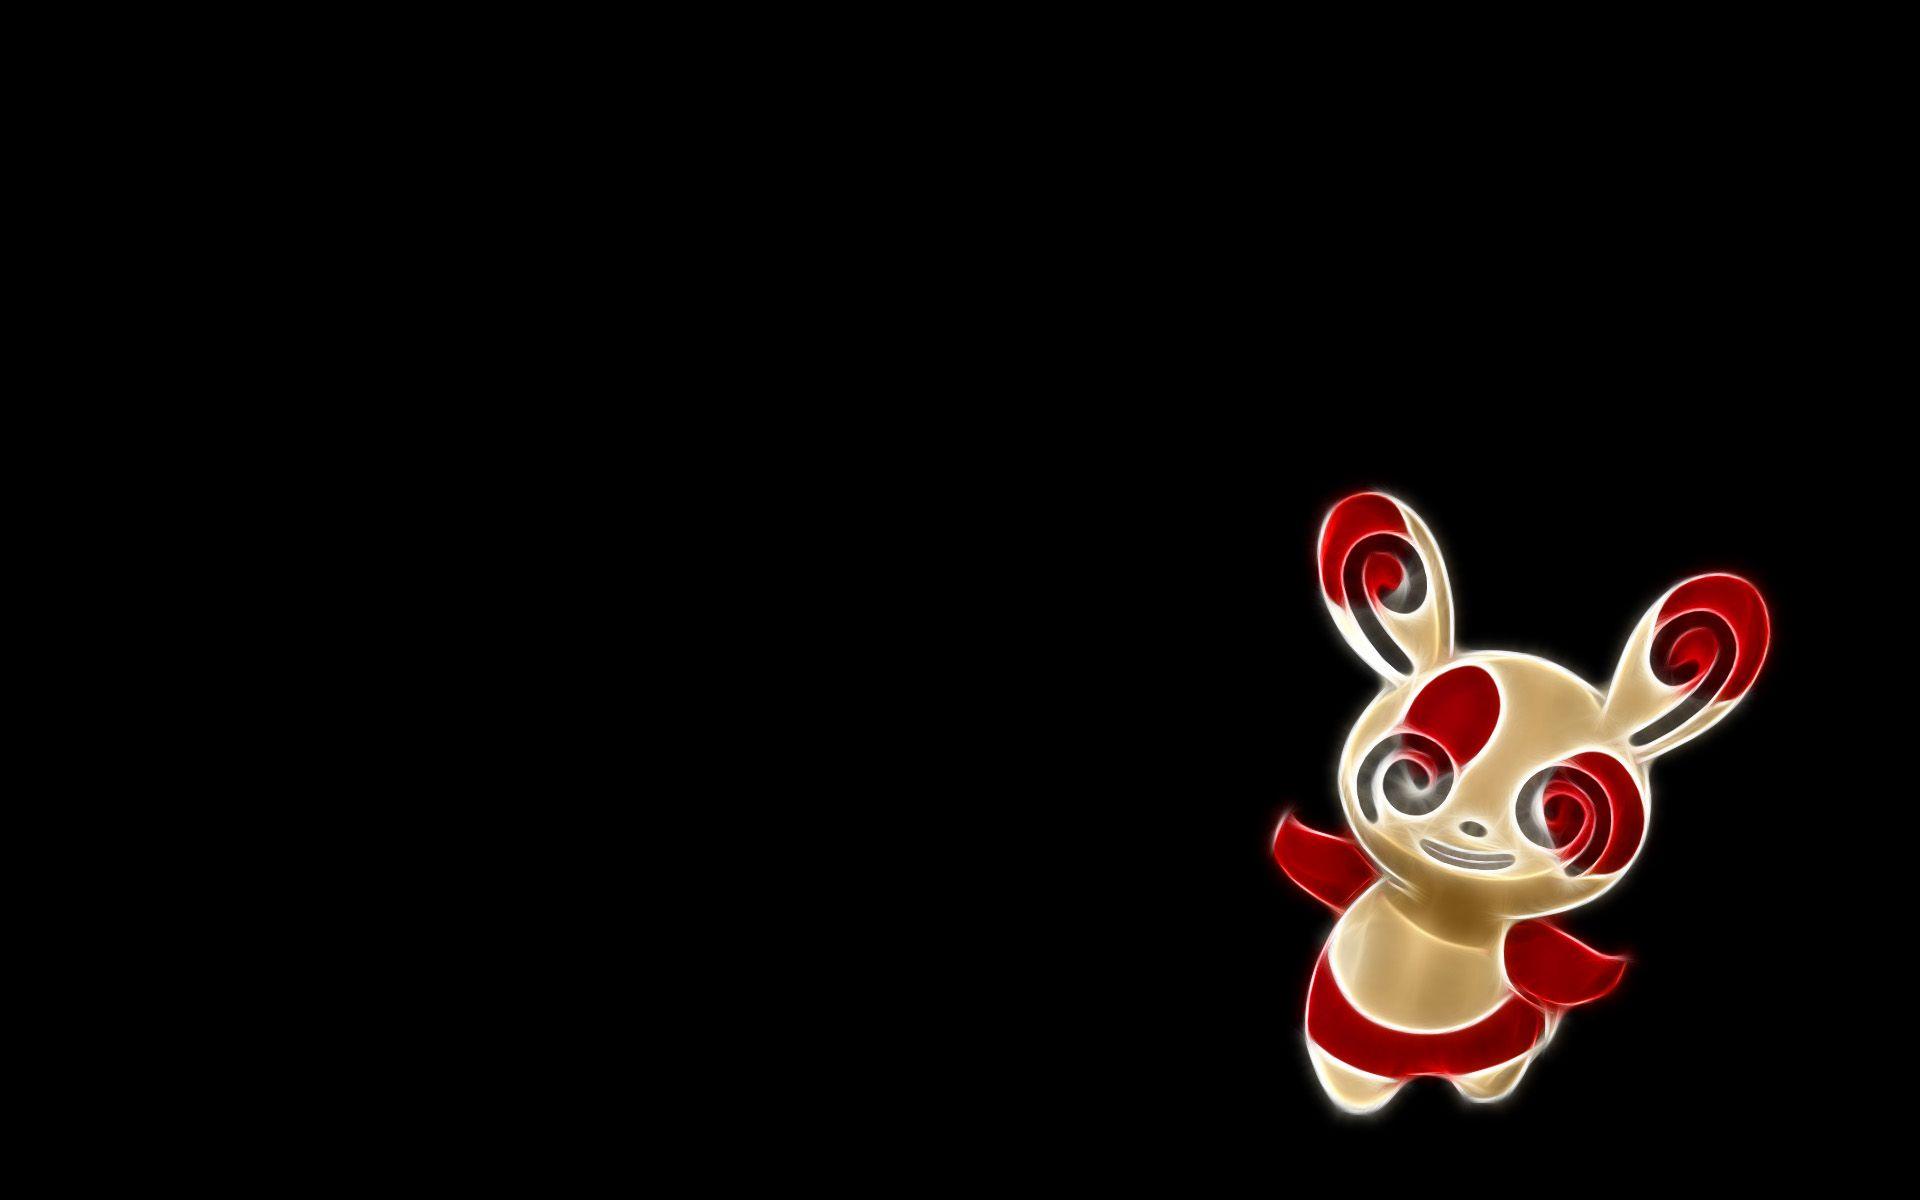 Spinda (Pokémon) HD Wallpaper and Background Image